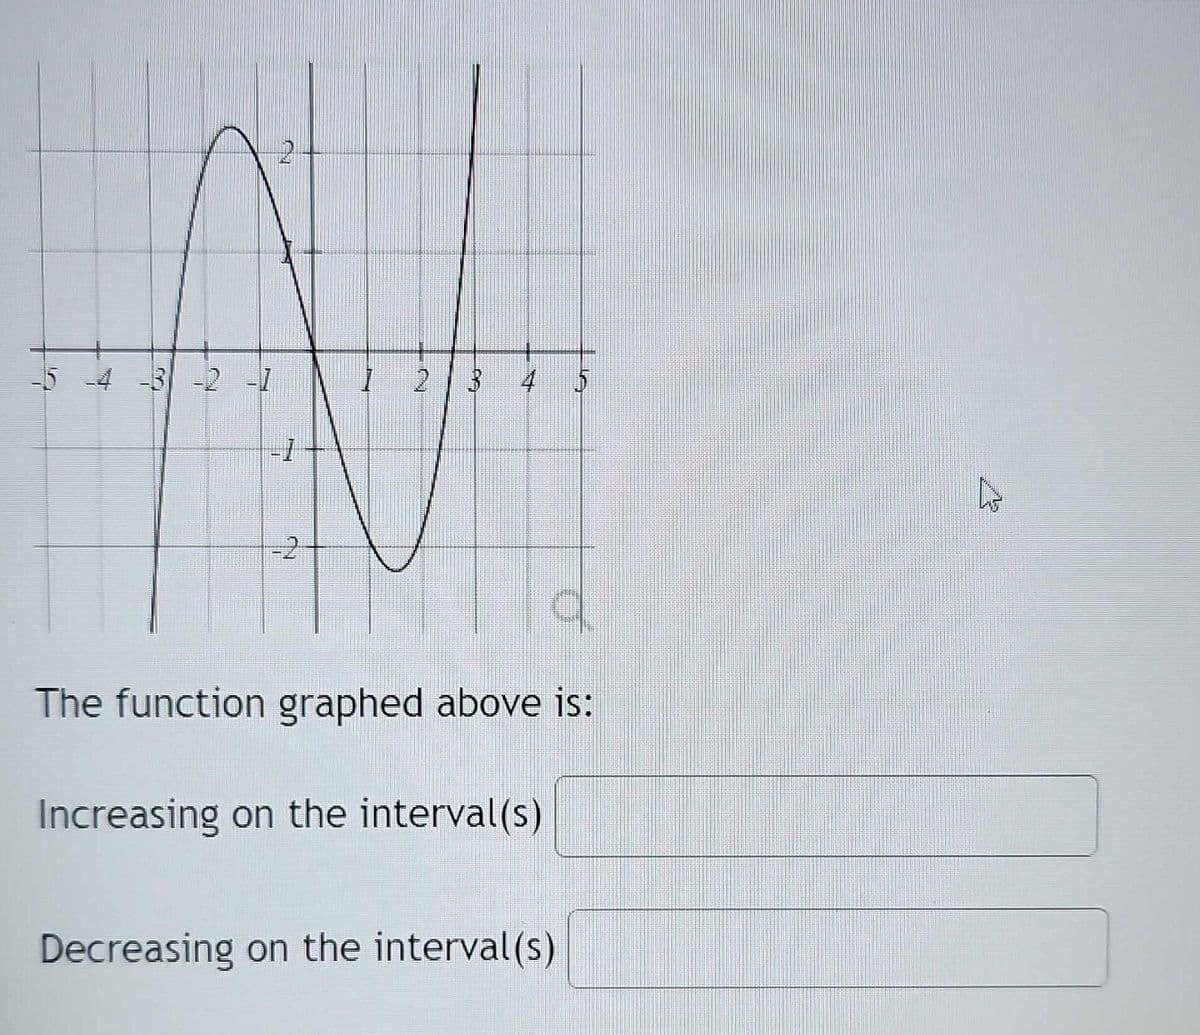 7
UN
The function graphed above is:
Increasing on the interval(s)
on the interval(s)
LA
Decreasing on